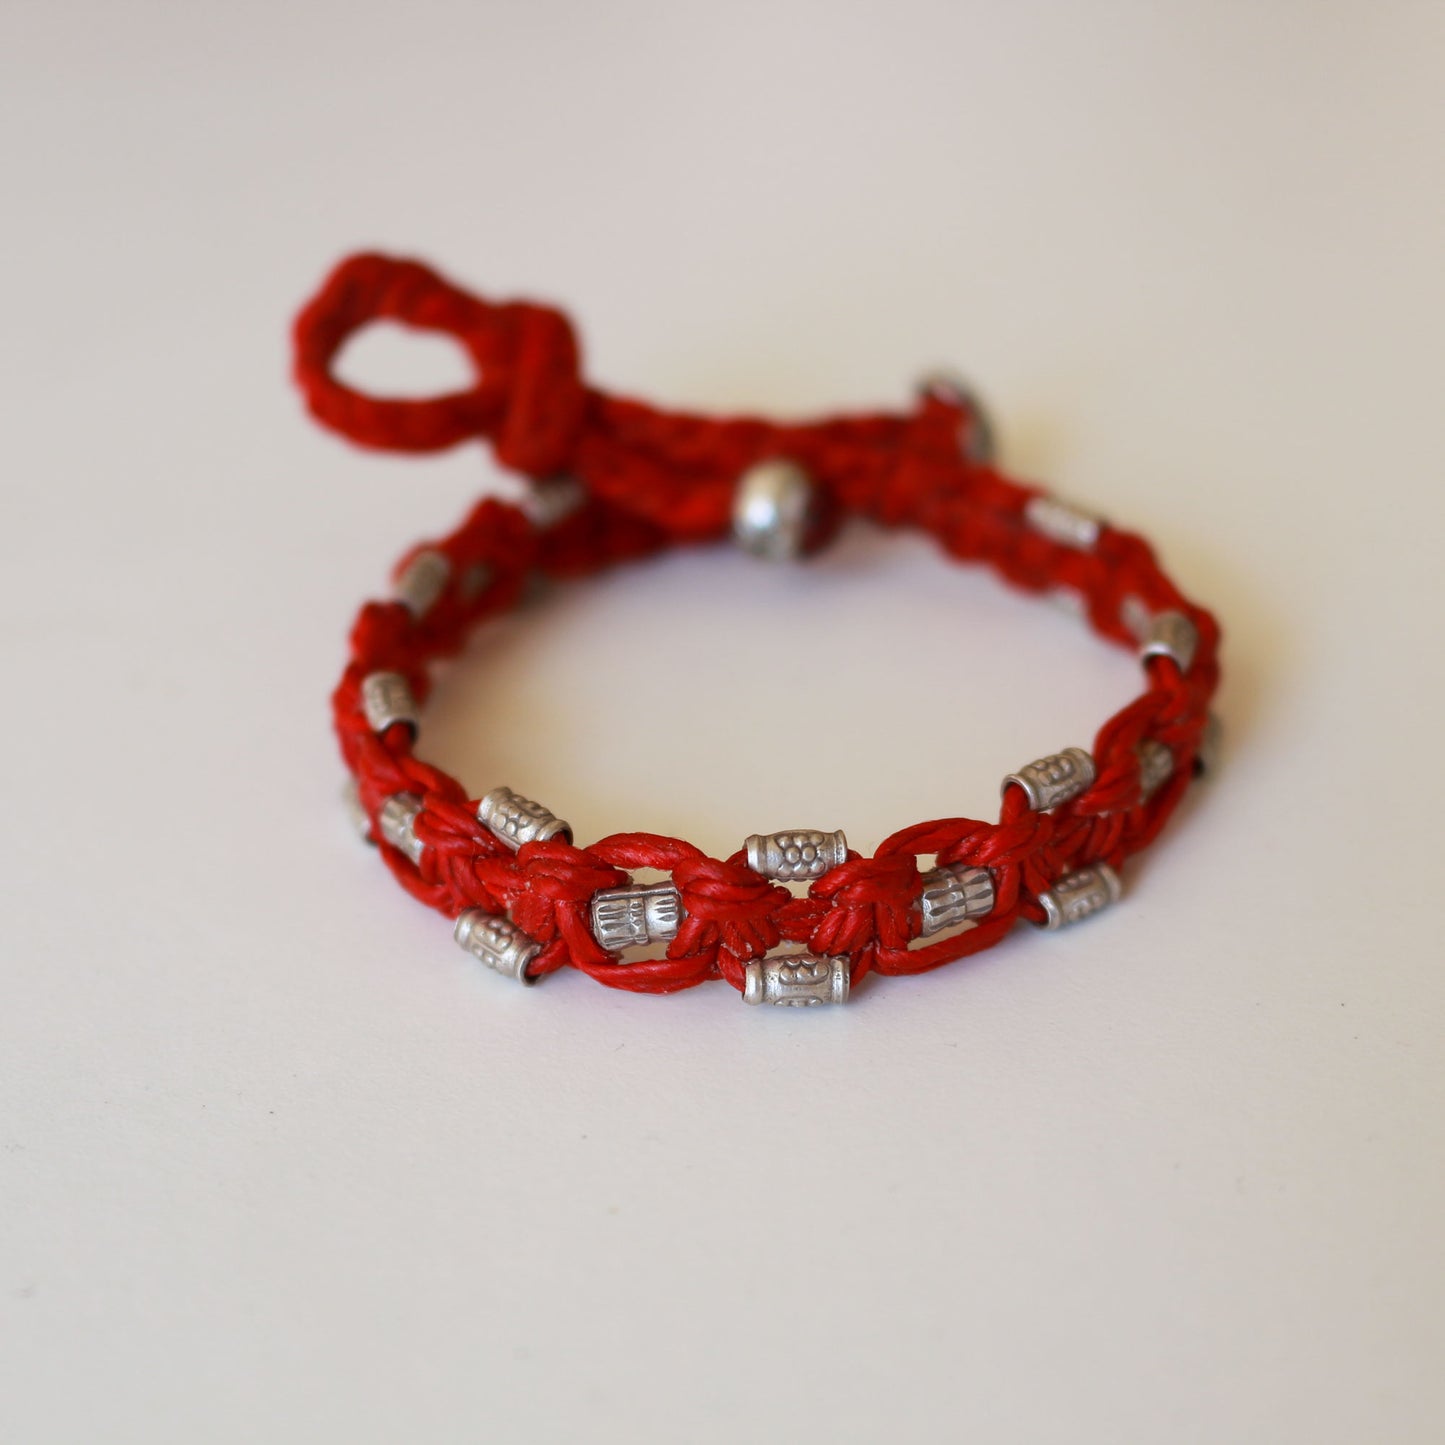 Silver beads on red cord bracelet